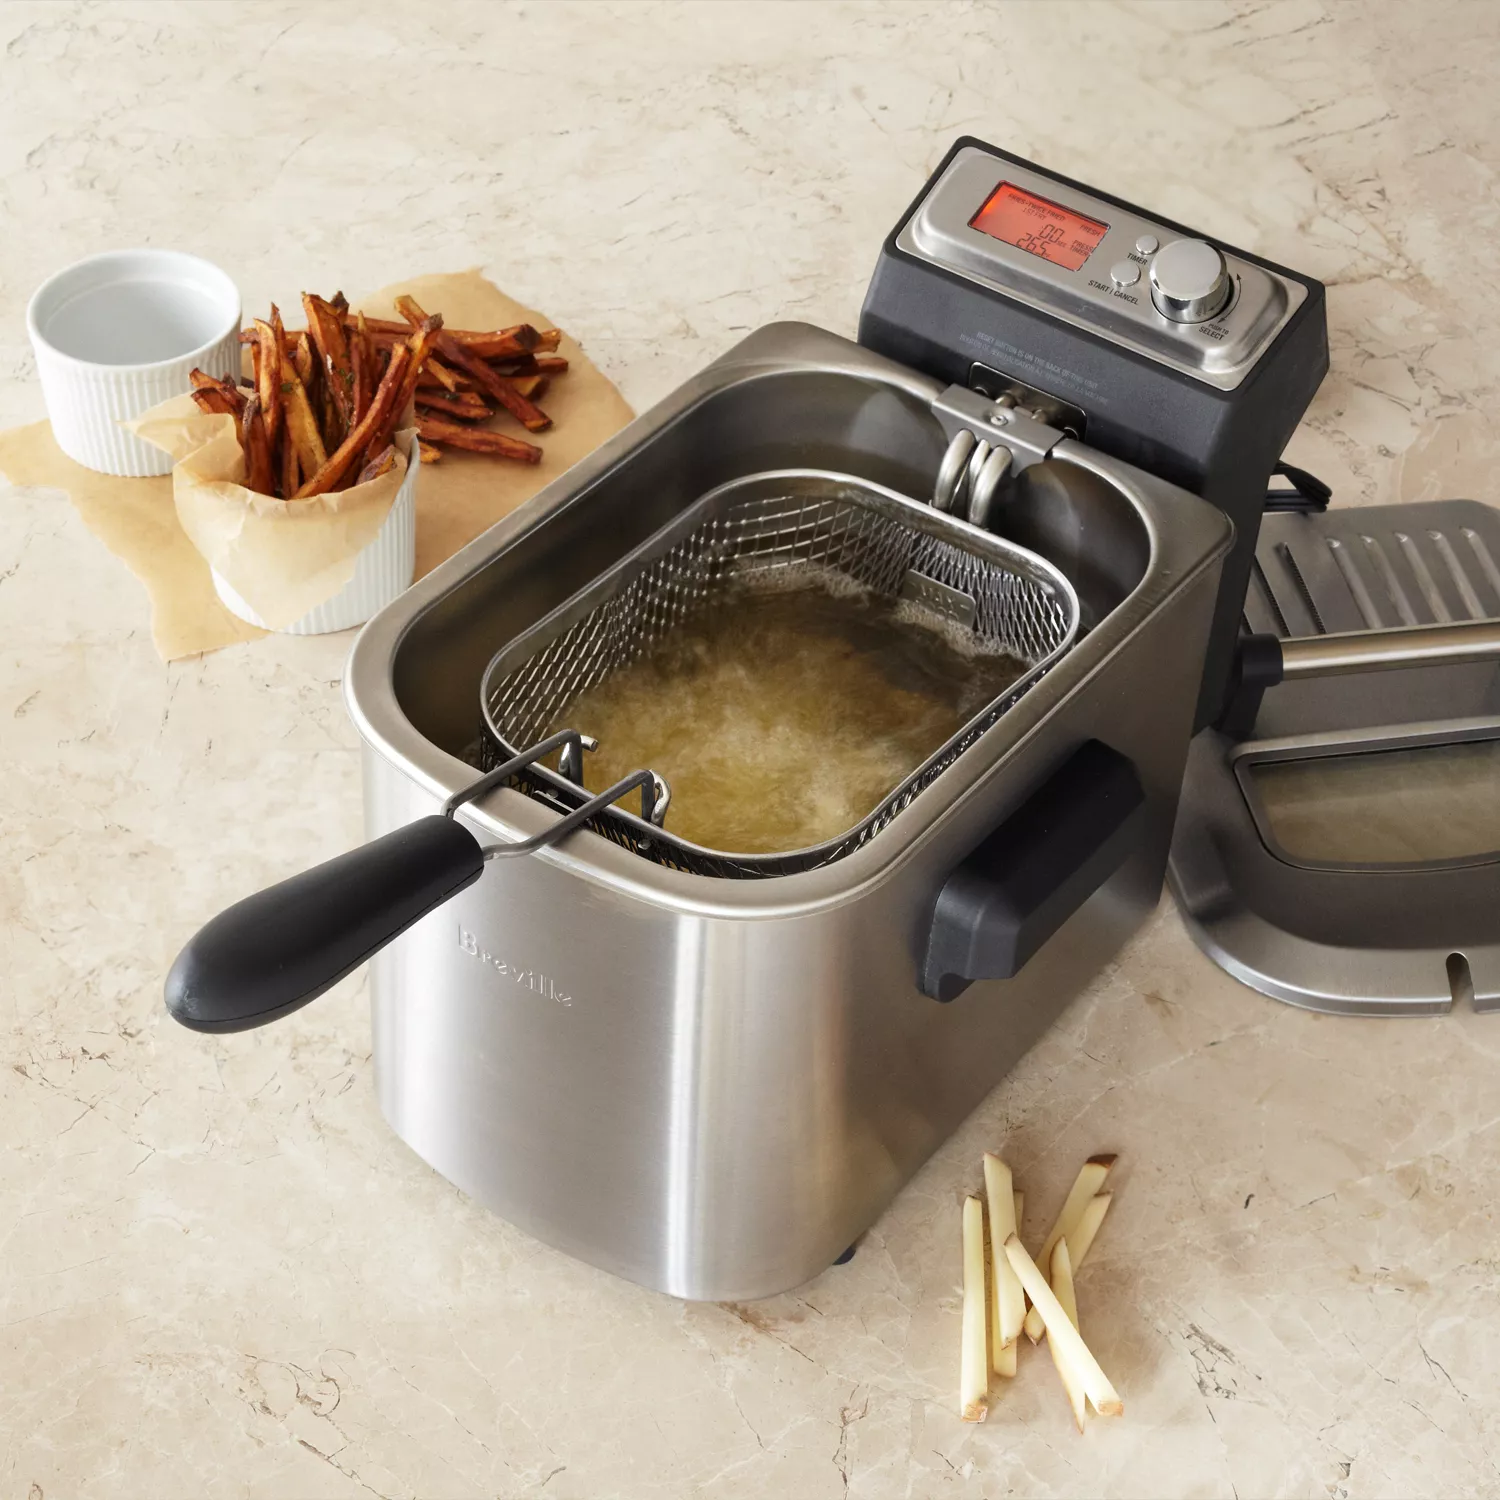 1.0L Hot selling Mini Deep Fryer with non-stick inner pot and